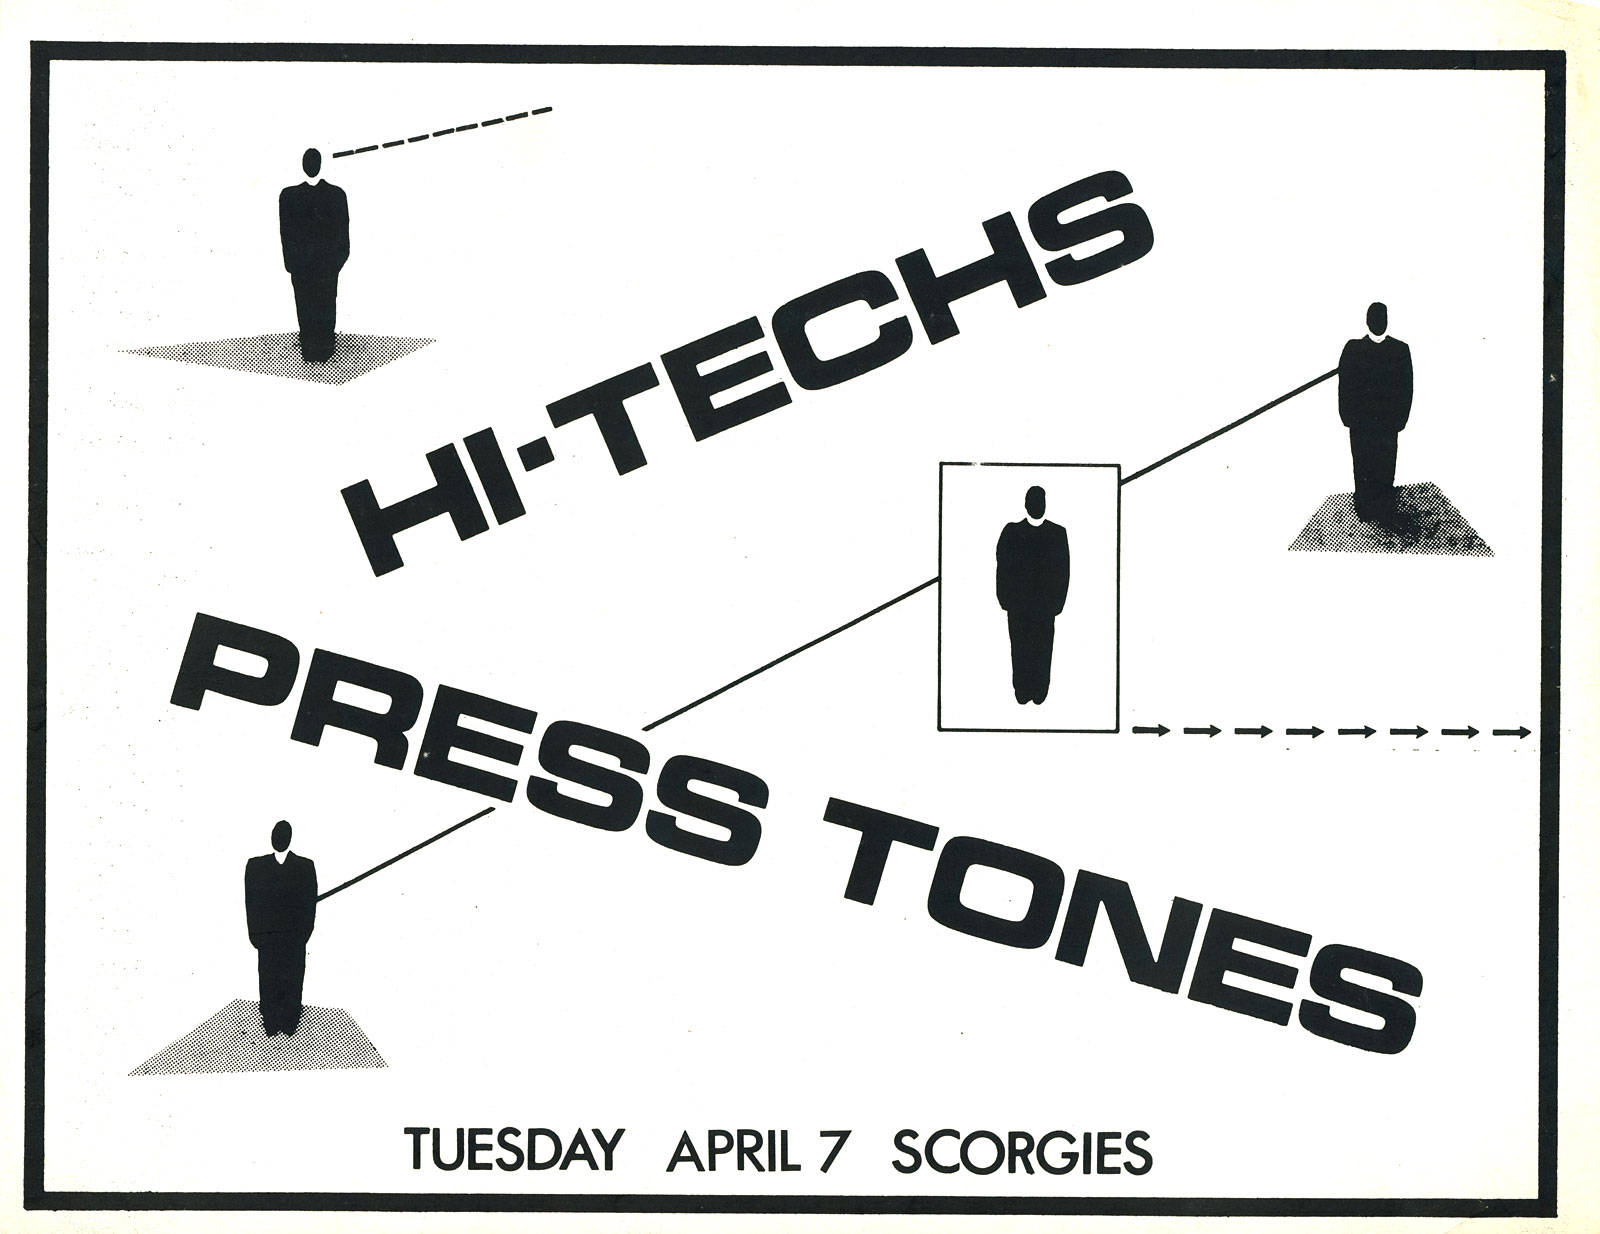 Poster for HI-Techs and Prestones at Scorgies in Rochester, New York on 04.07.1981